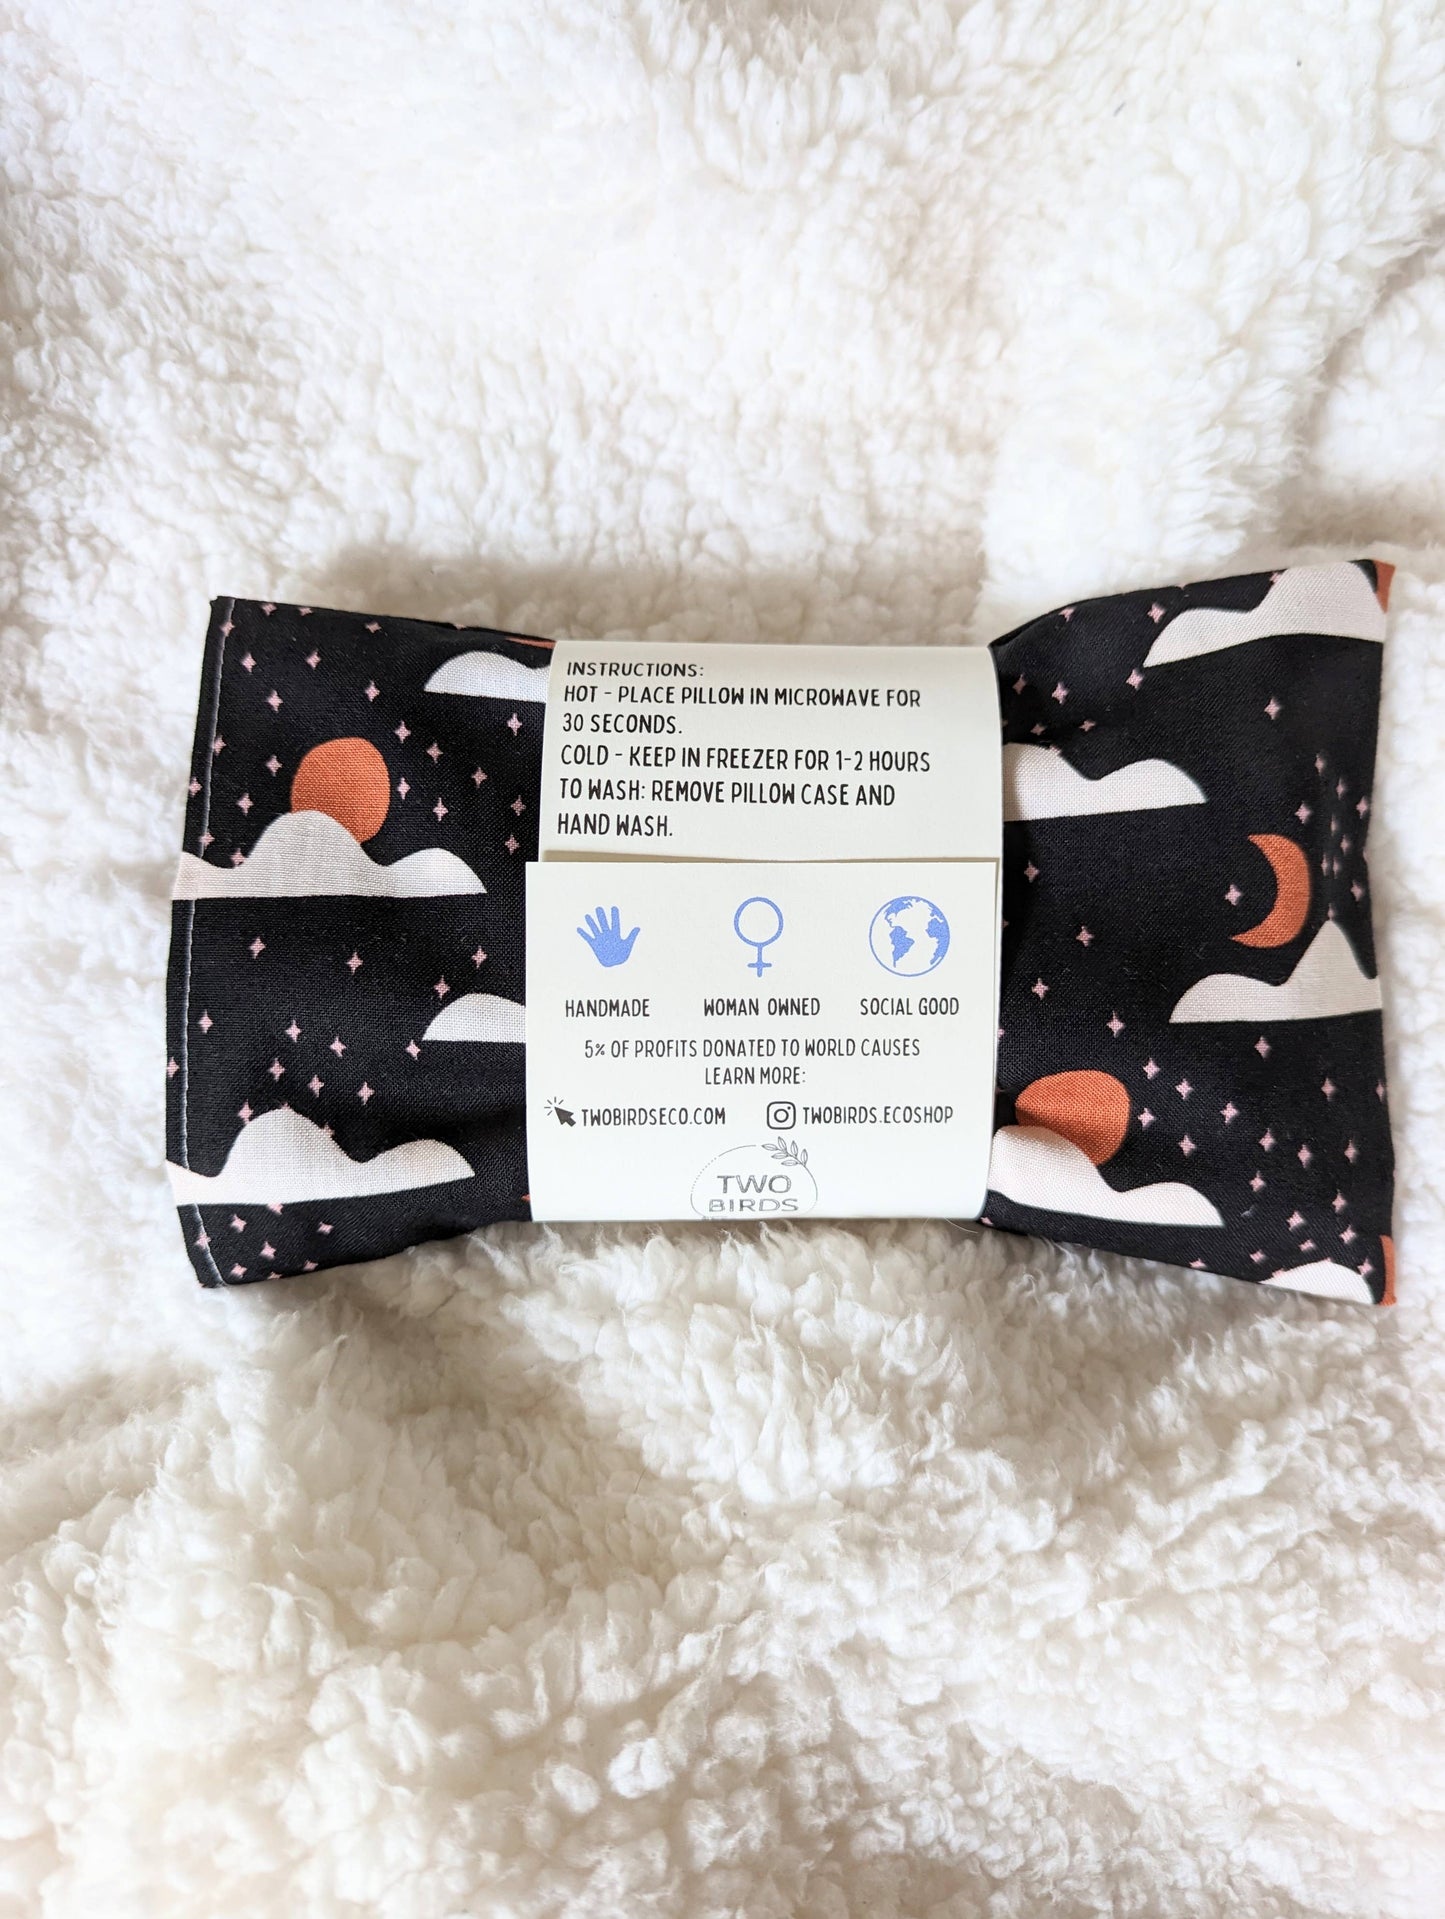 Weighted Aromatherapy Eye Pillow - Sweet Dreams